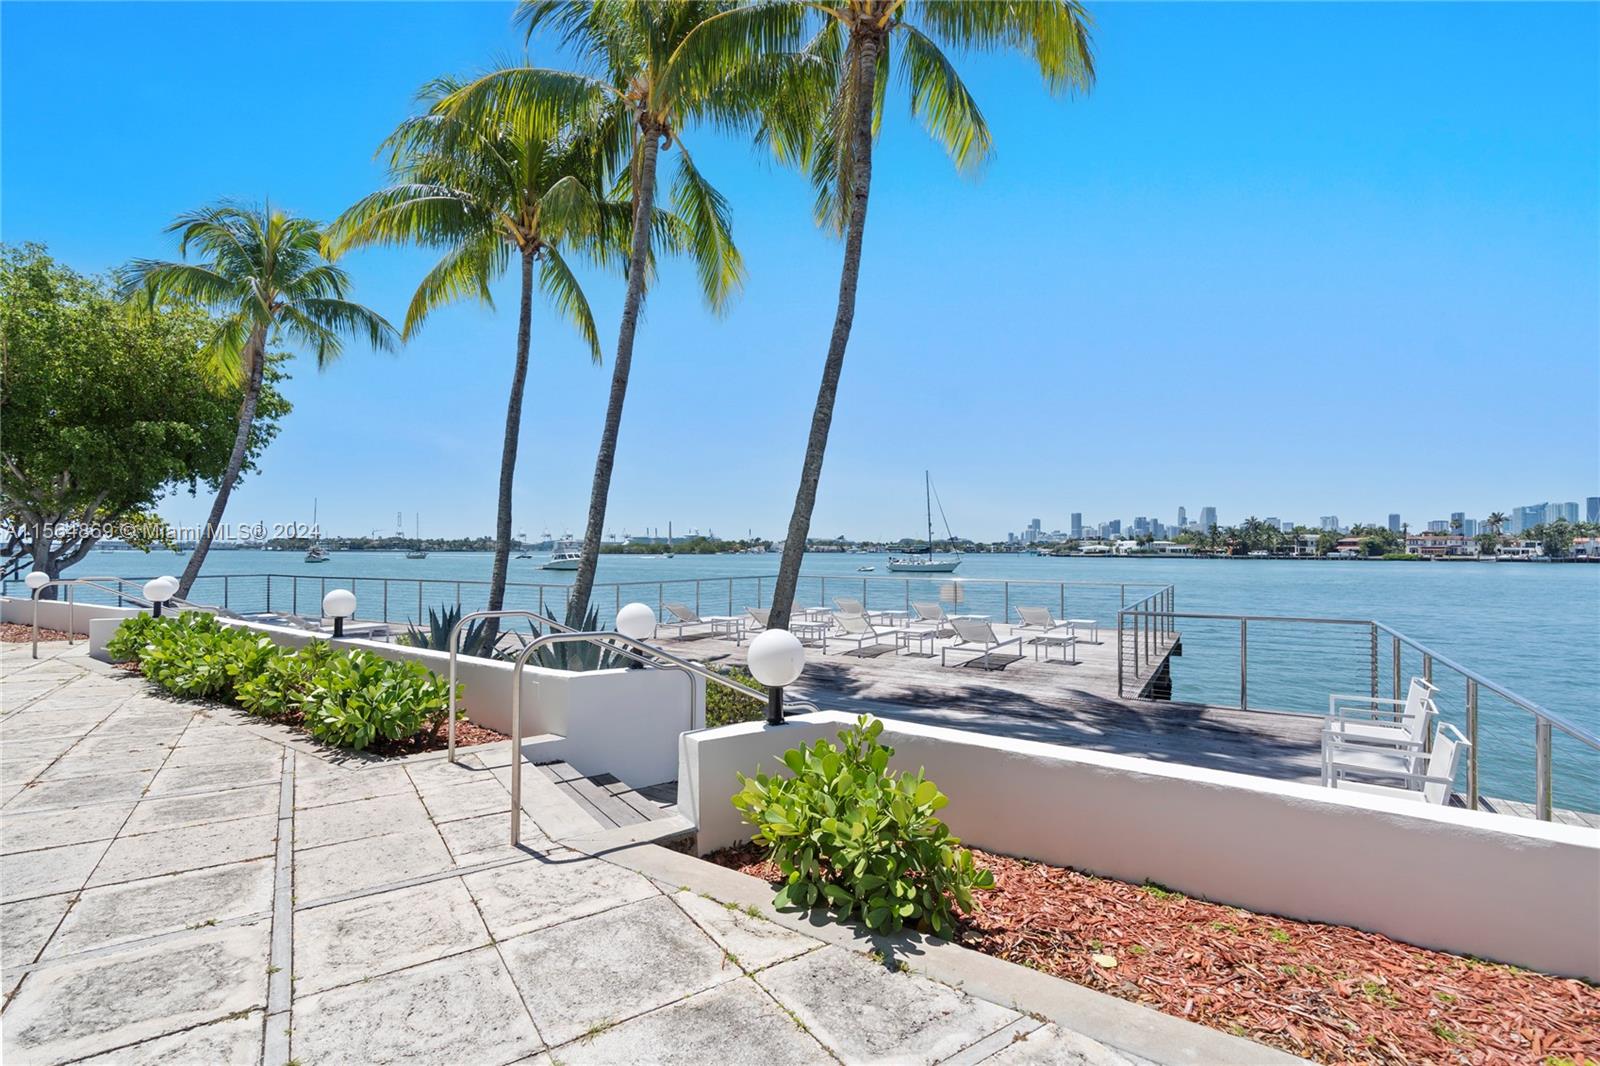 Property for Sale at 3 Island Ave 15 Ph D, Miami Beach, Miami-Dade County, Florida - Bedrooms: 2 
Bathrooms: 2  - $1,545,000